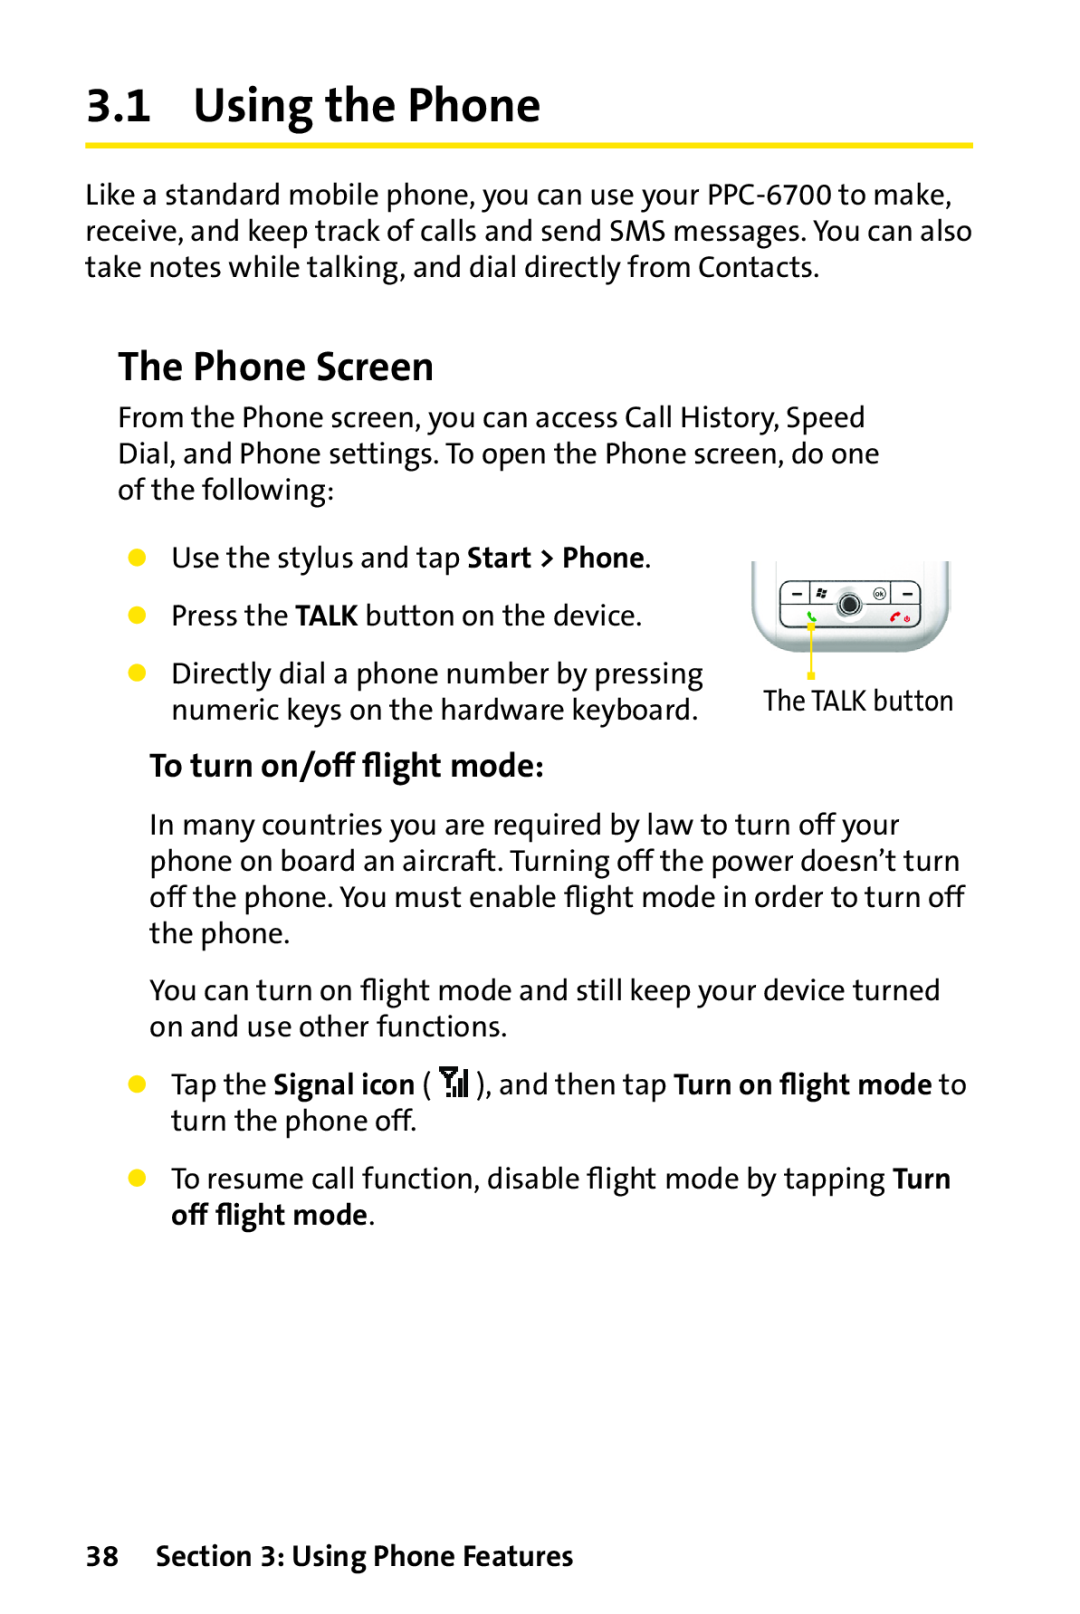 Sprint Nextel PPC-6700 manual Using the Phone, The Phone Screen, To turn on/off ﬂight mode, Using Phone Features 